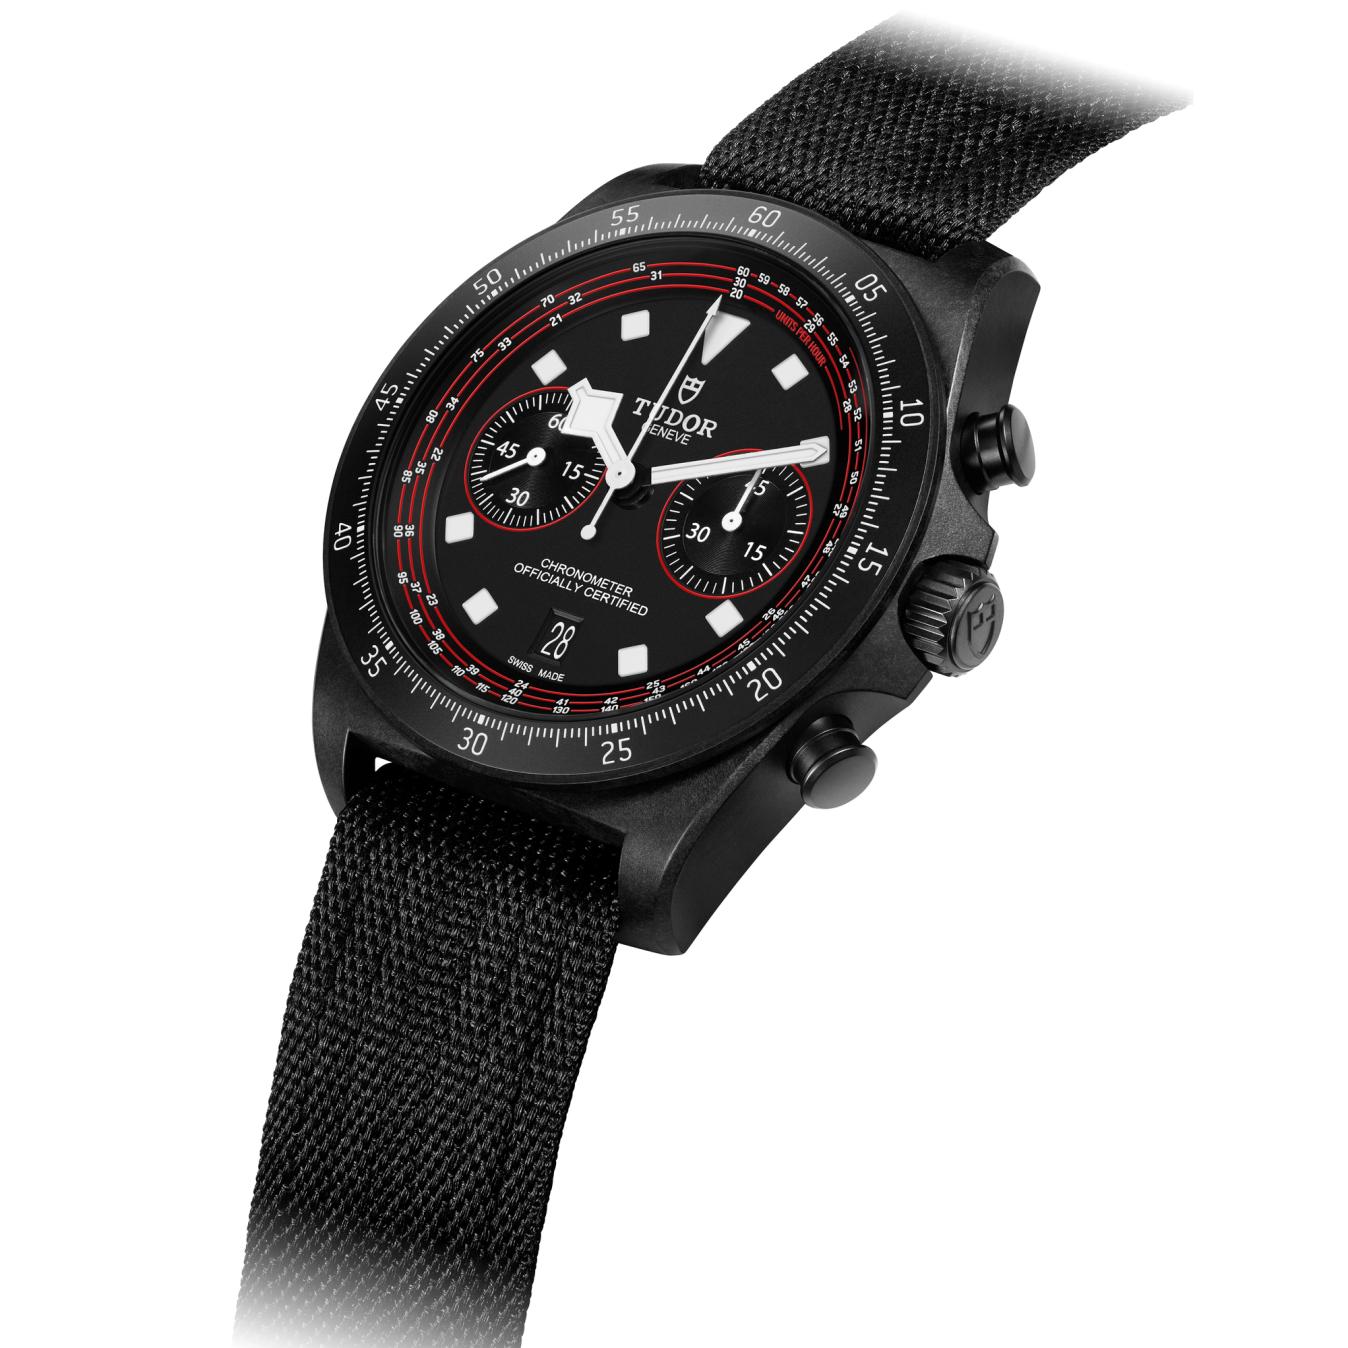 The tachymeter can estimate your average speed over a given distance